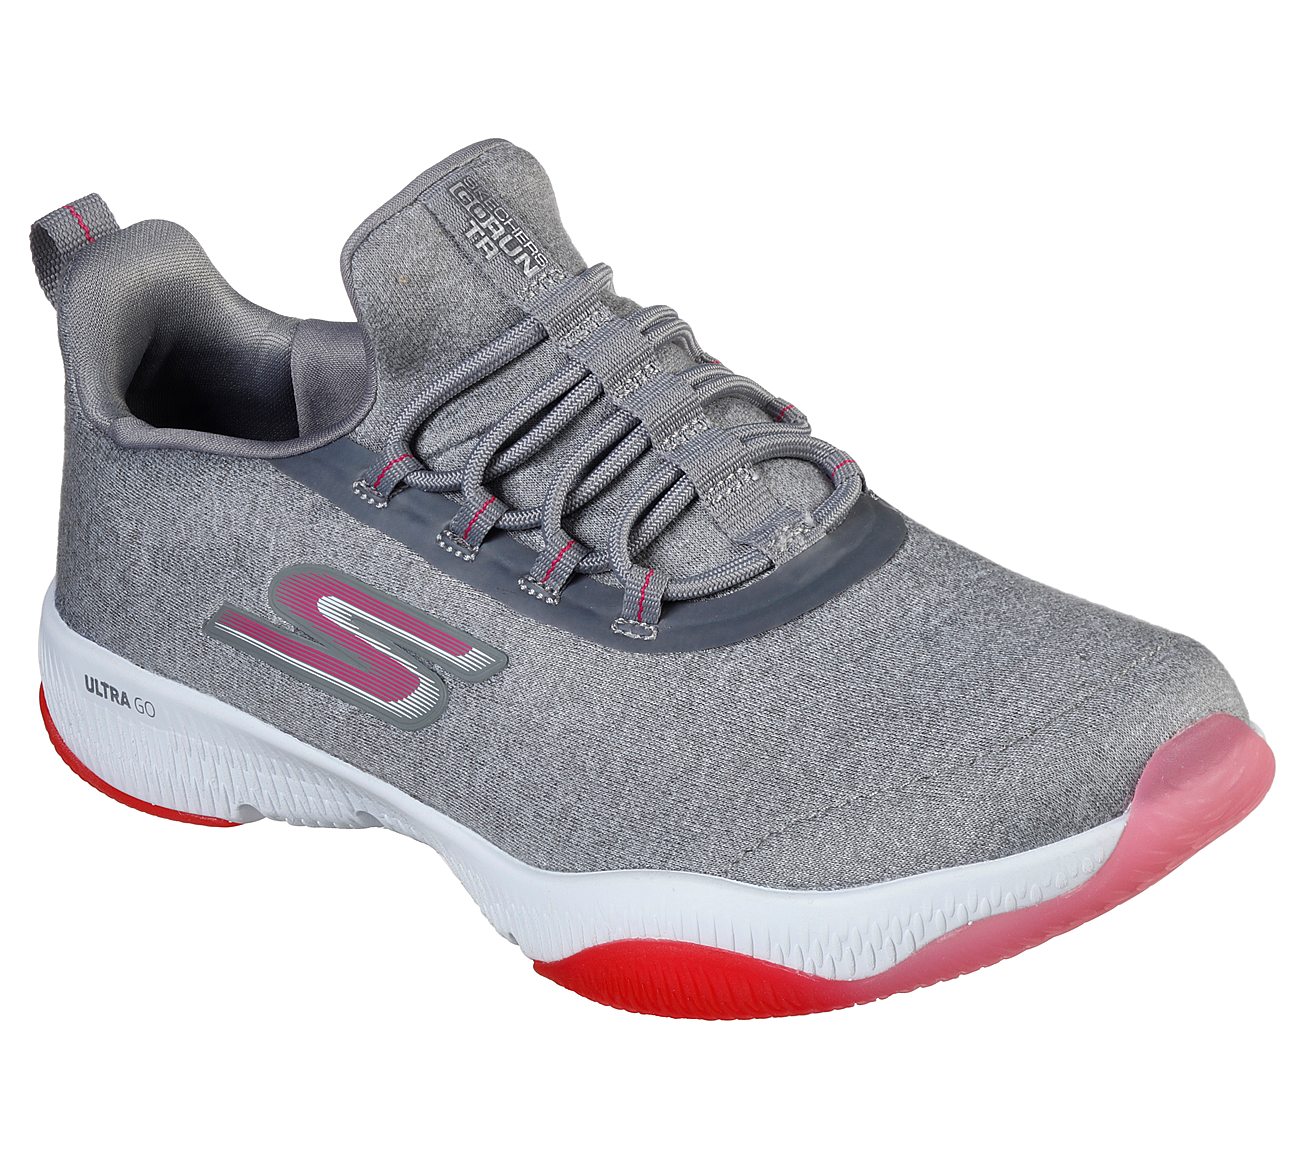 GO RUN TR- EXCEPTION, GREY/PINK Footwear Lateral View